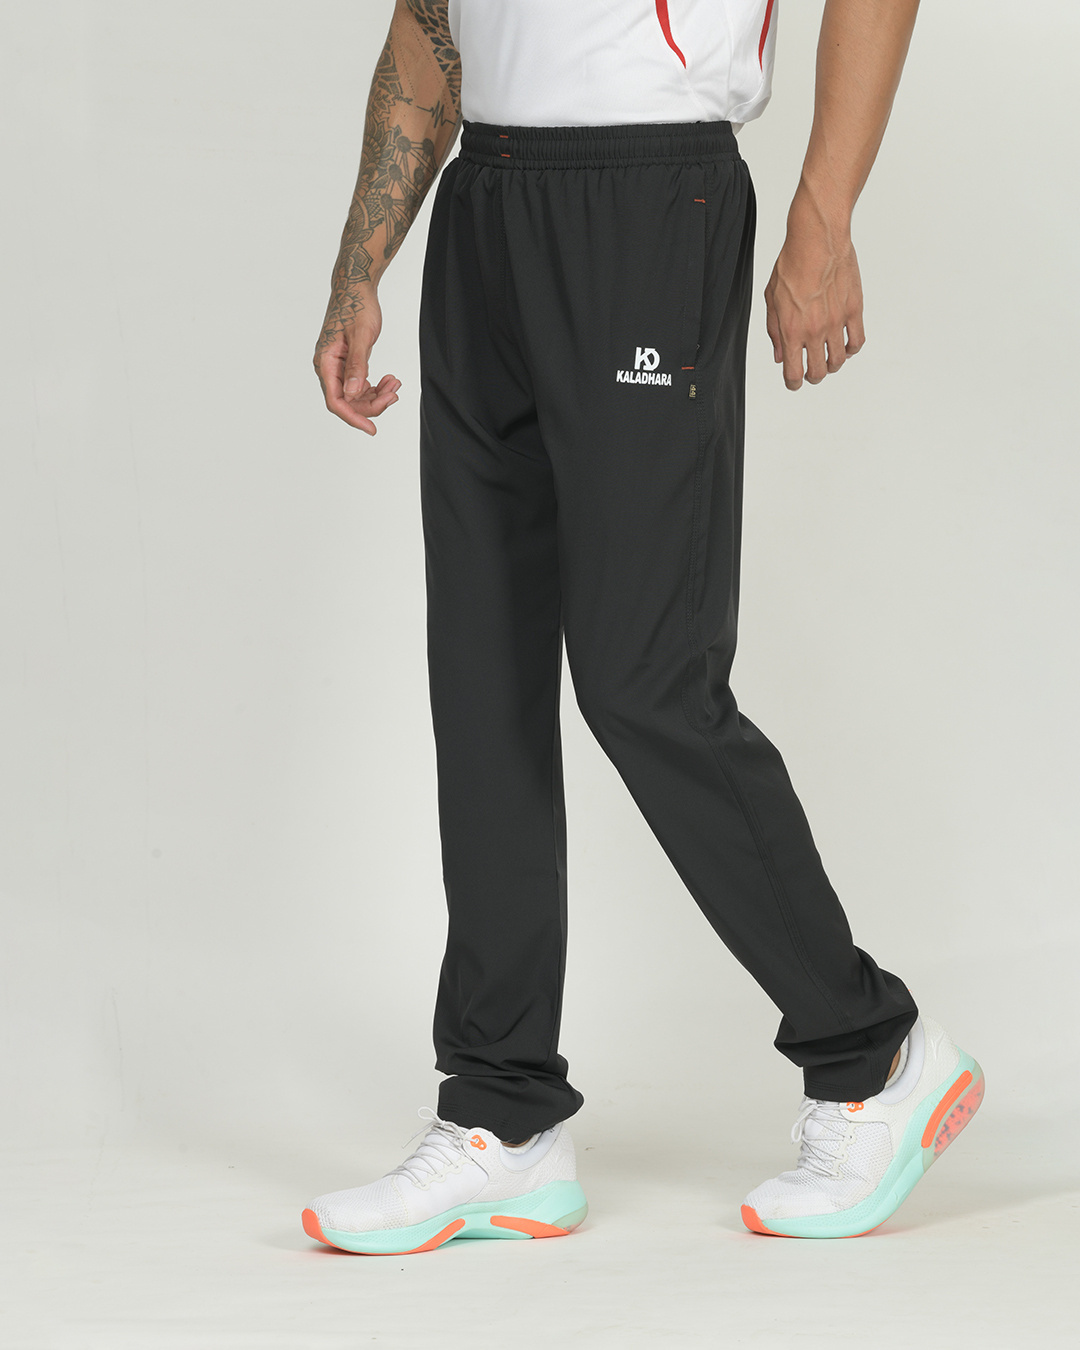 Men's Track Pants Vs Sweatpants: Which is the Better Option?, by kaladhara